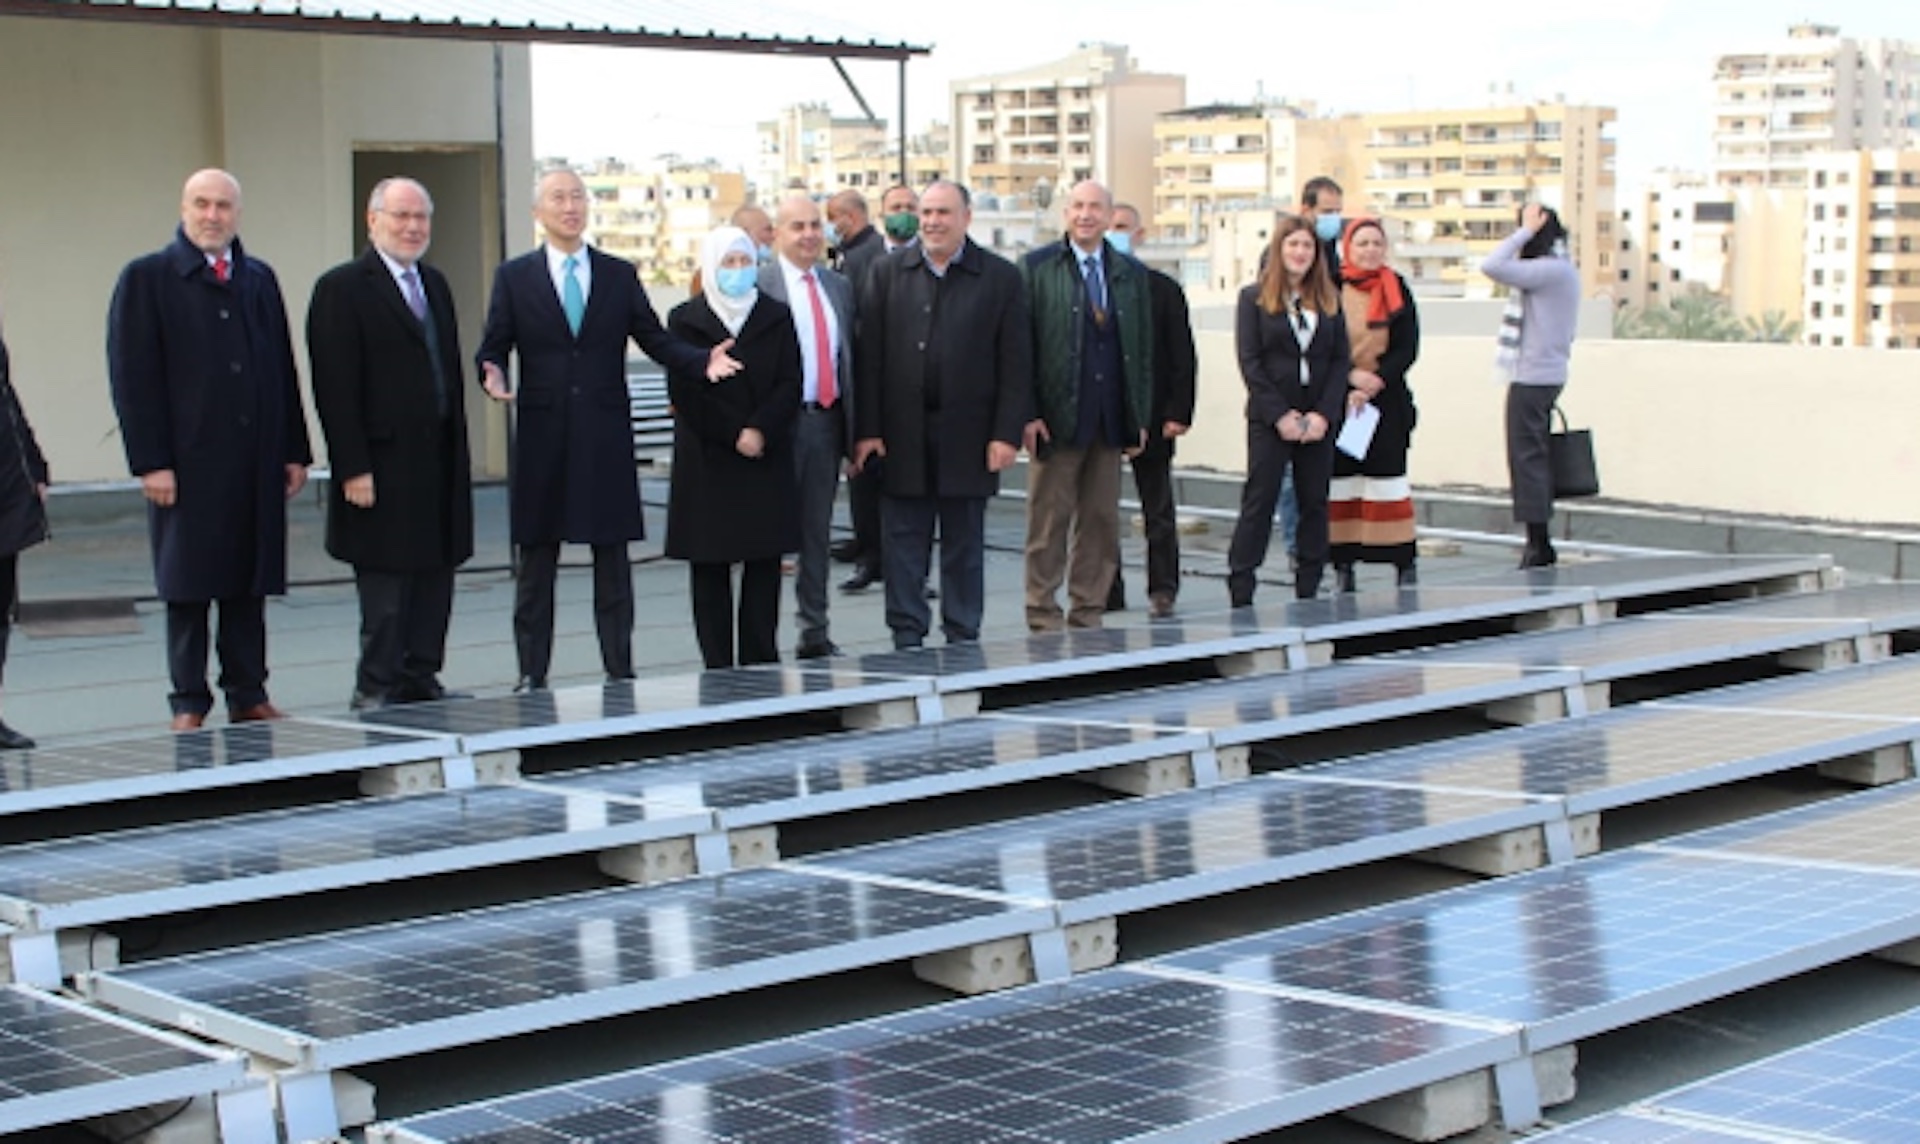 Japan donates solar panels and funds renewable energy to 122 schools in Lebanon